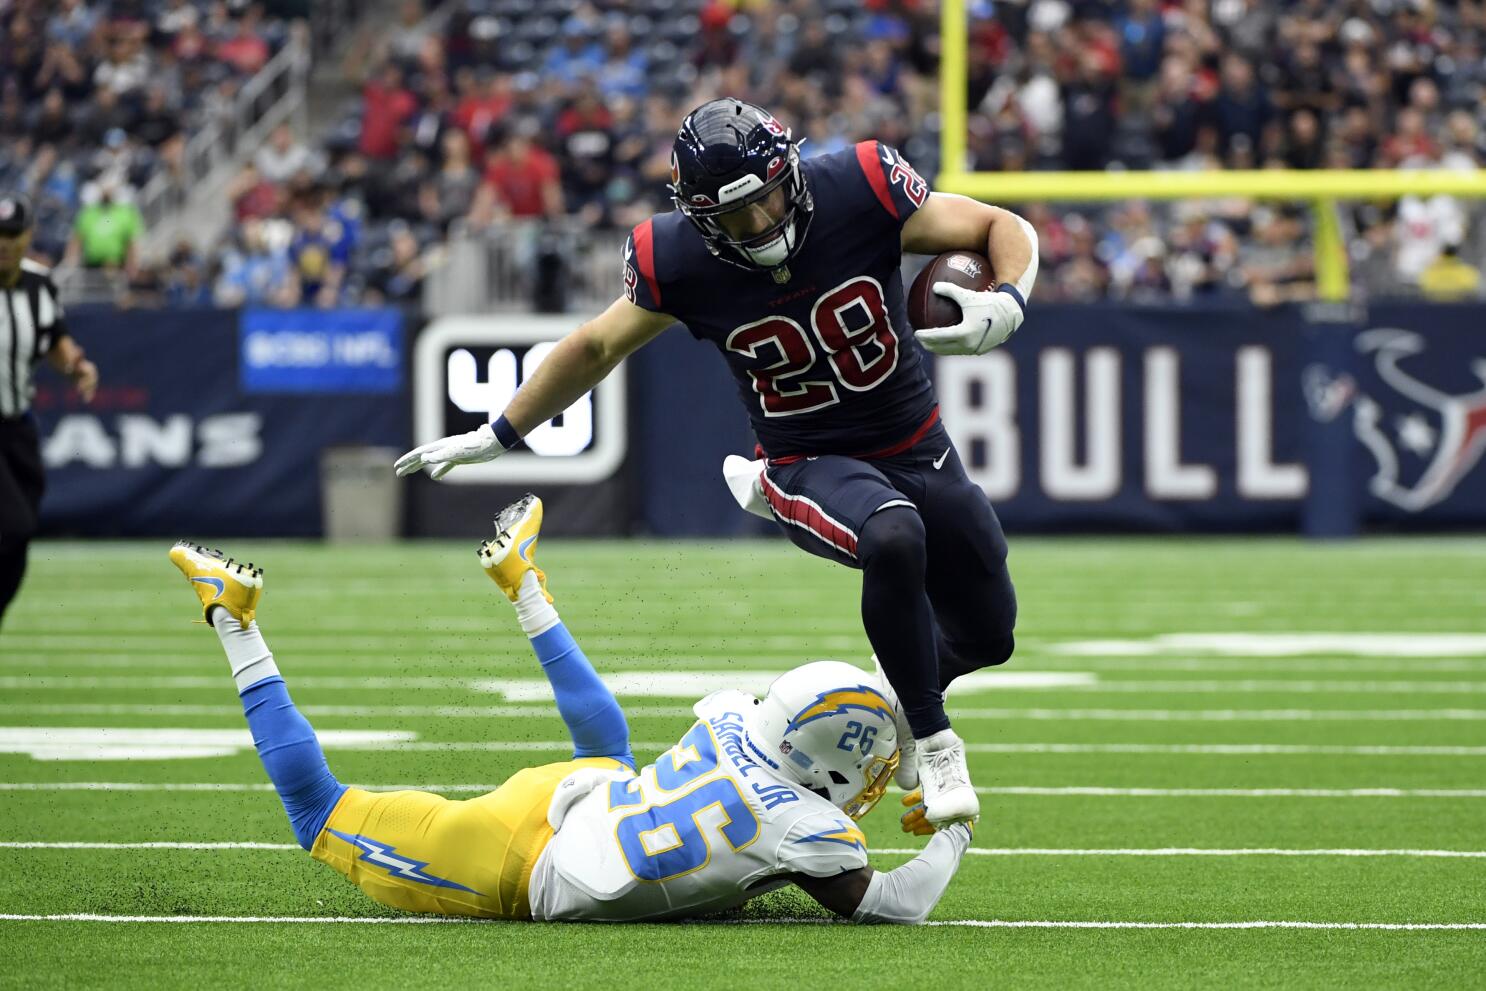 Houston Texans: Defense is run over in loss to Bears